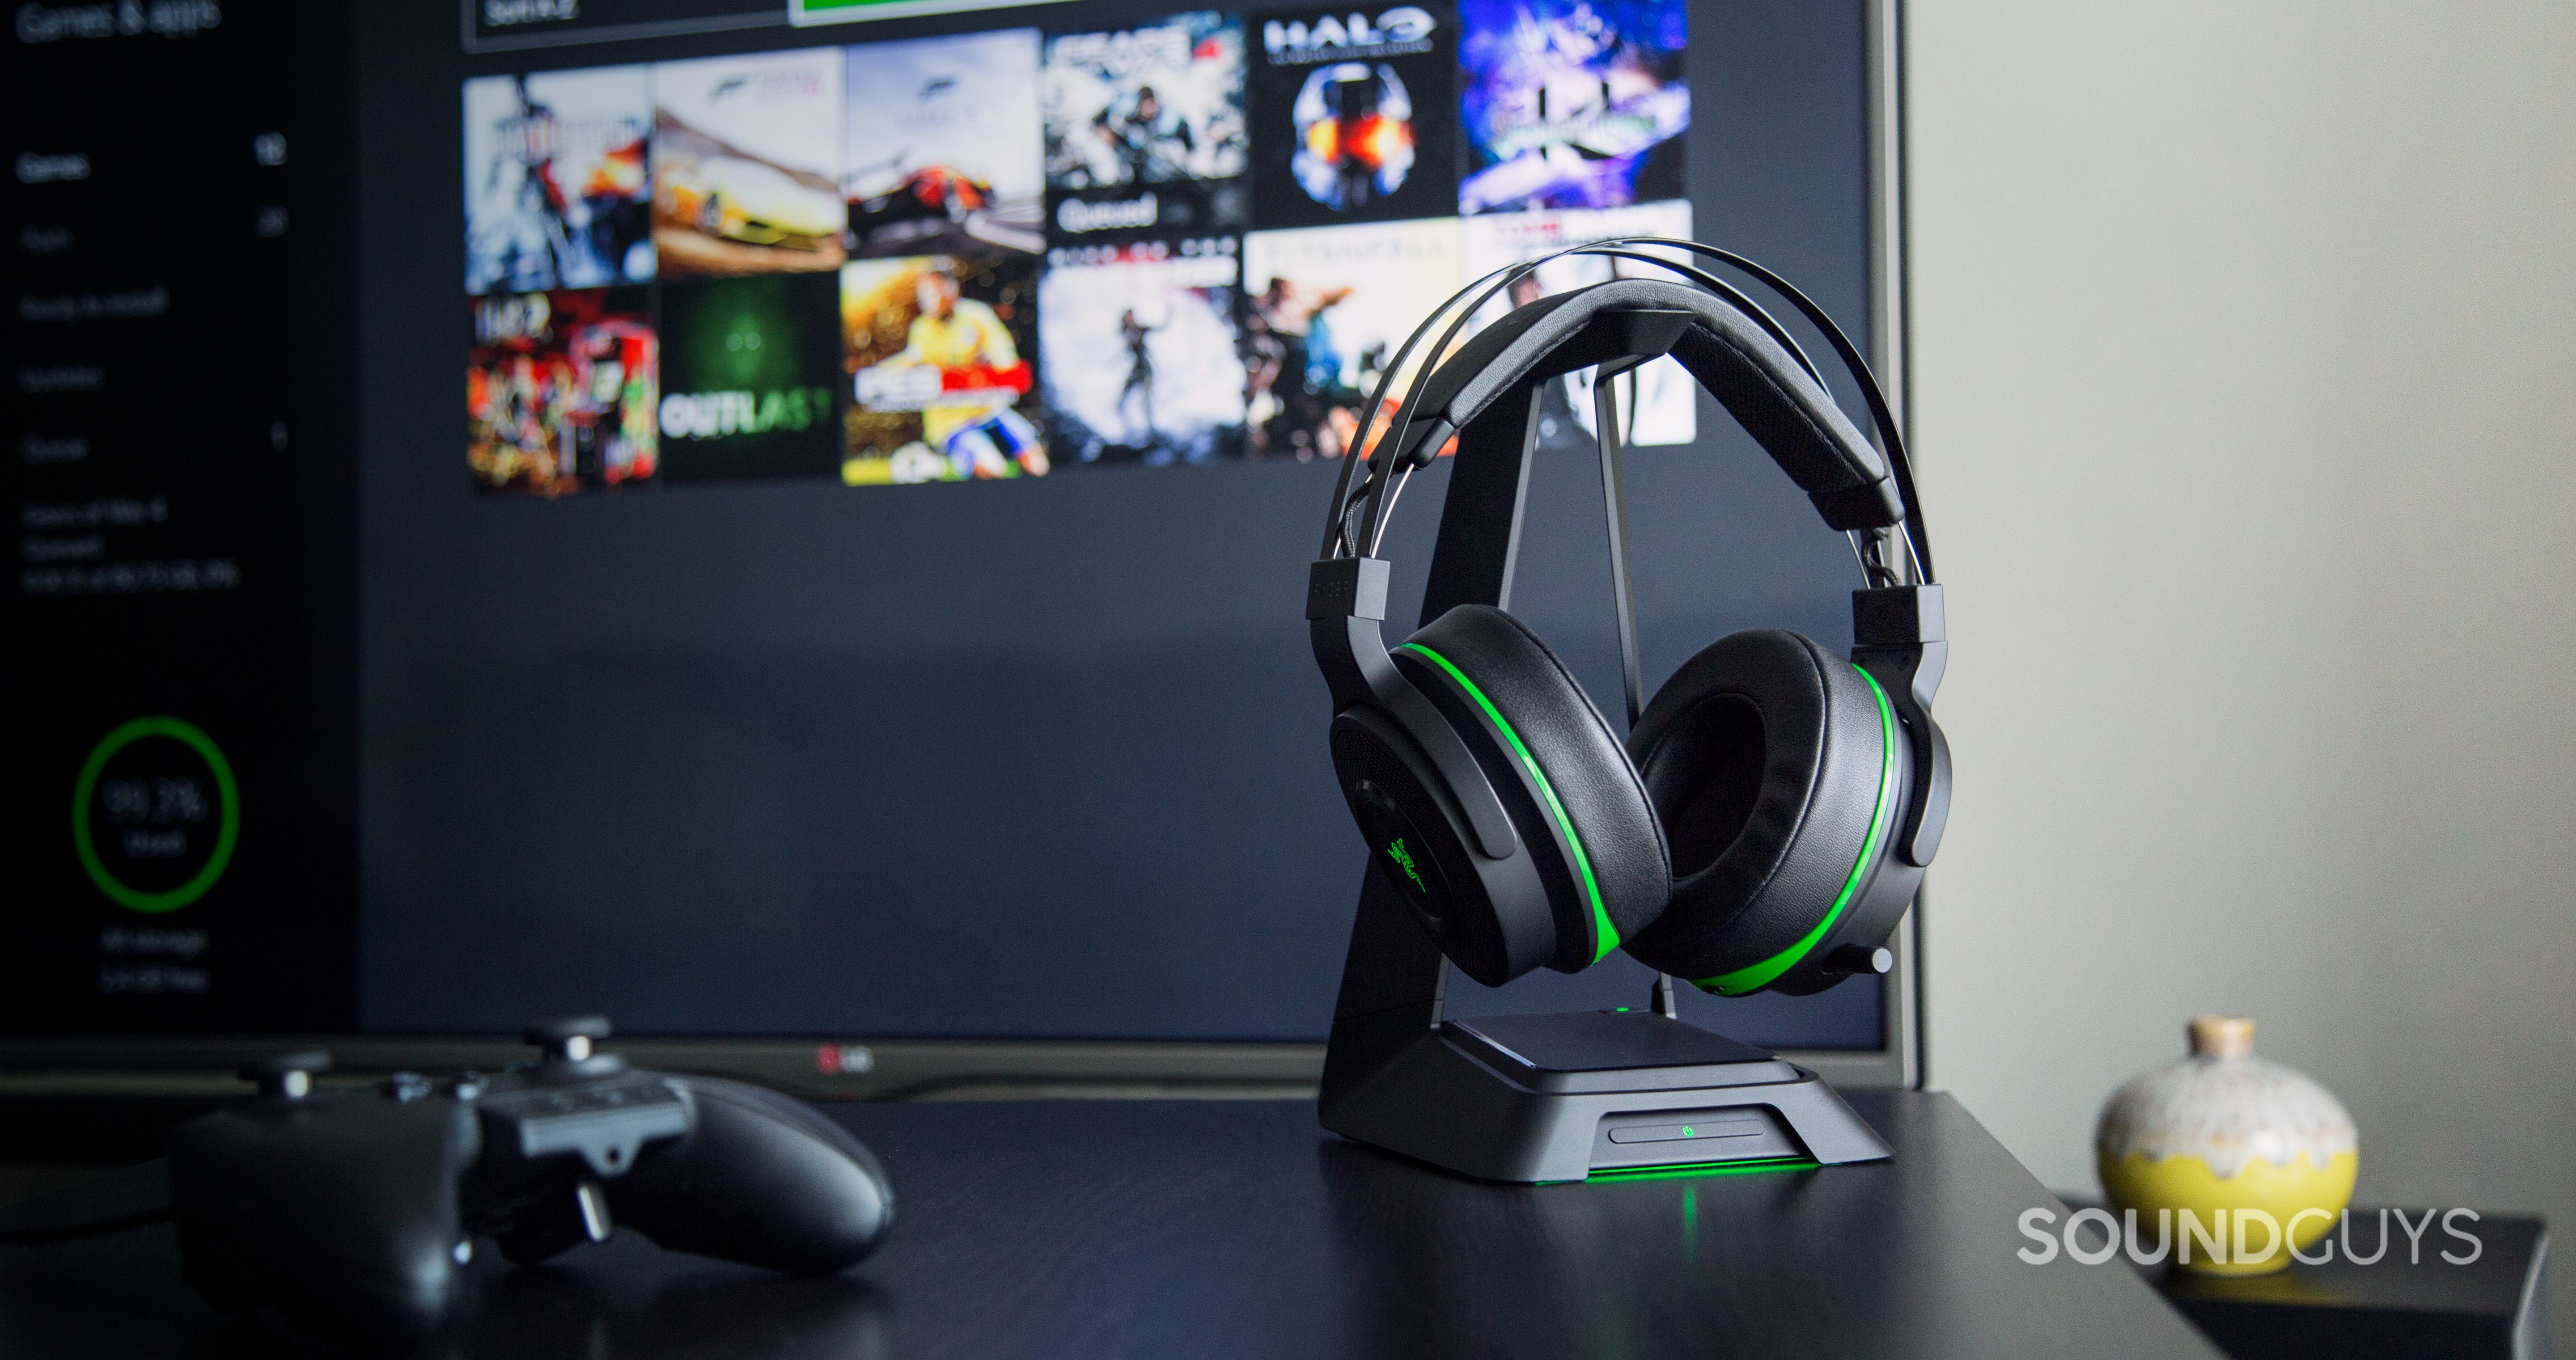 The Razer Thresher headphone pictured alongside an xbox-one and TV.